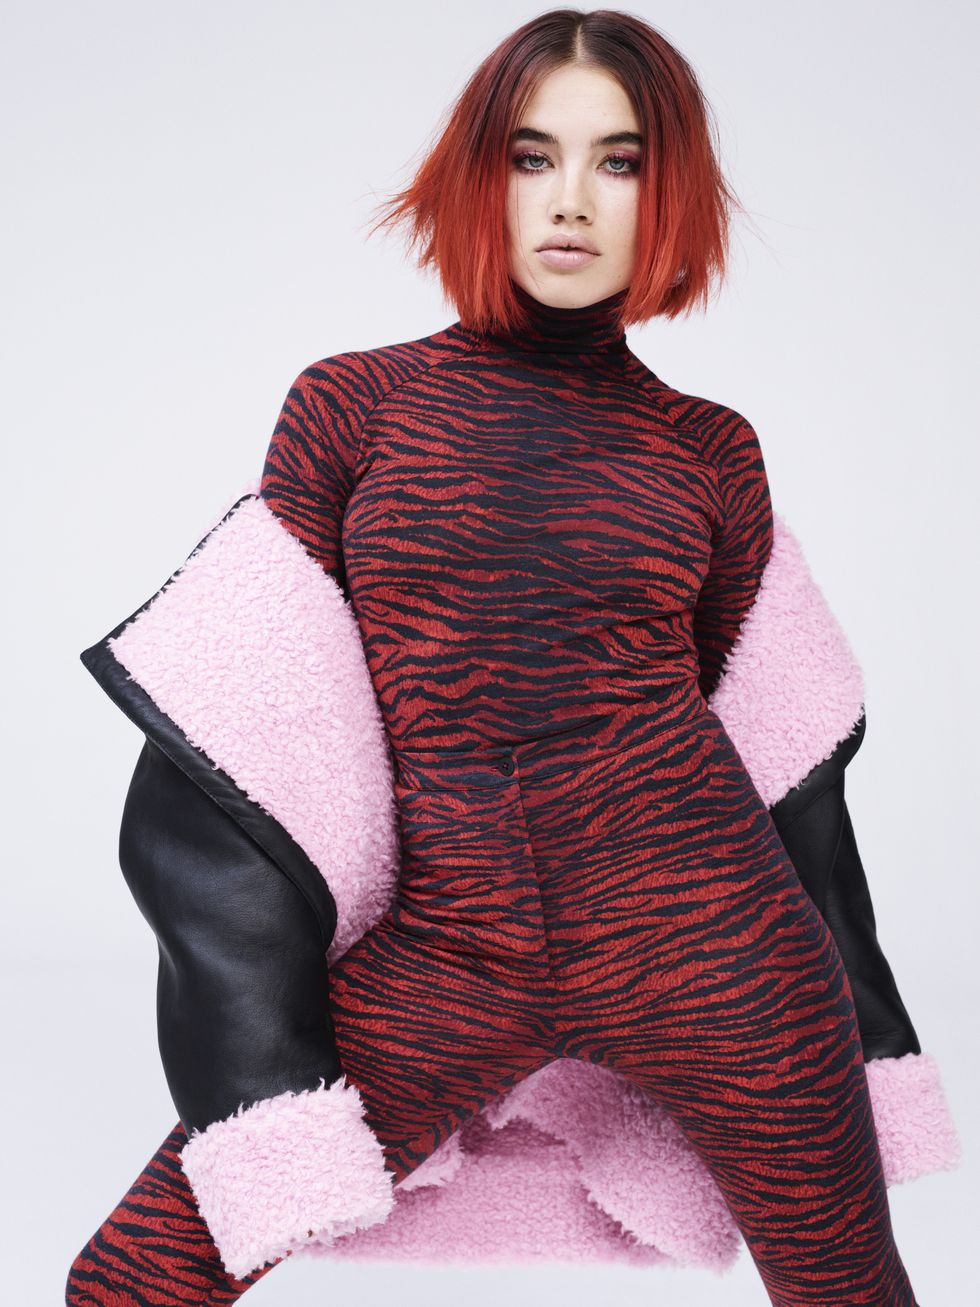 Lip, Sleeve, Shoulder, Red, Red hair, Fashion model, Fashion, Costume accessory, Model, Waist, 